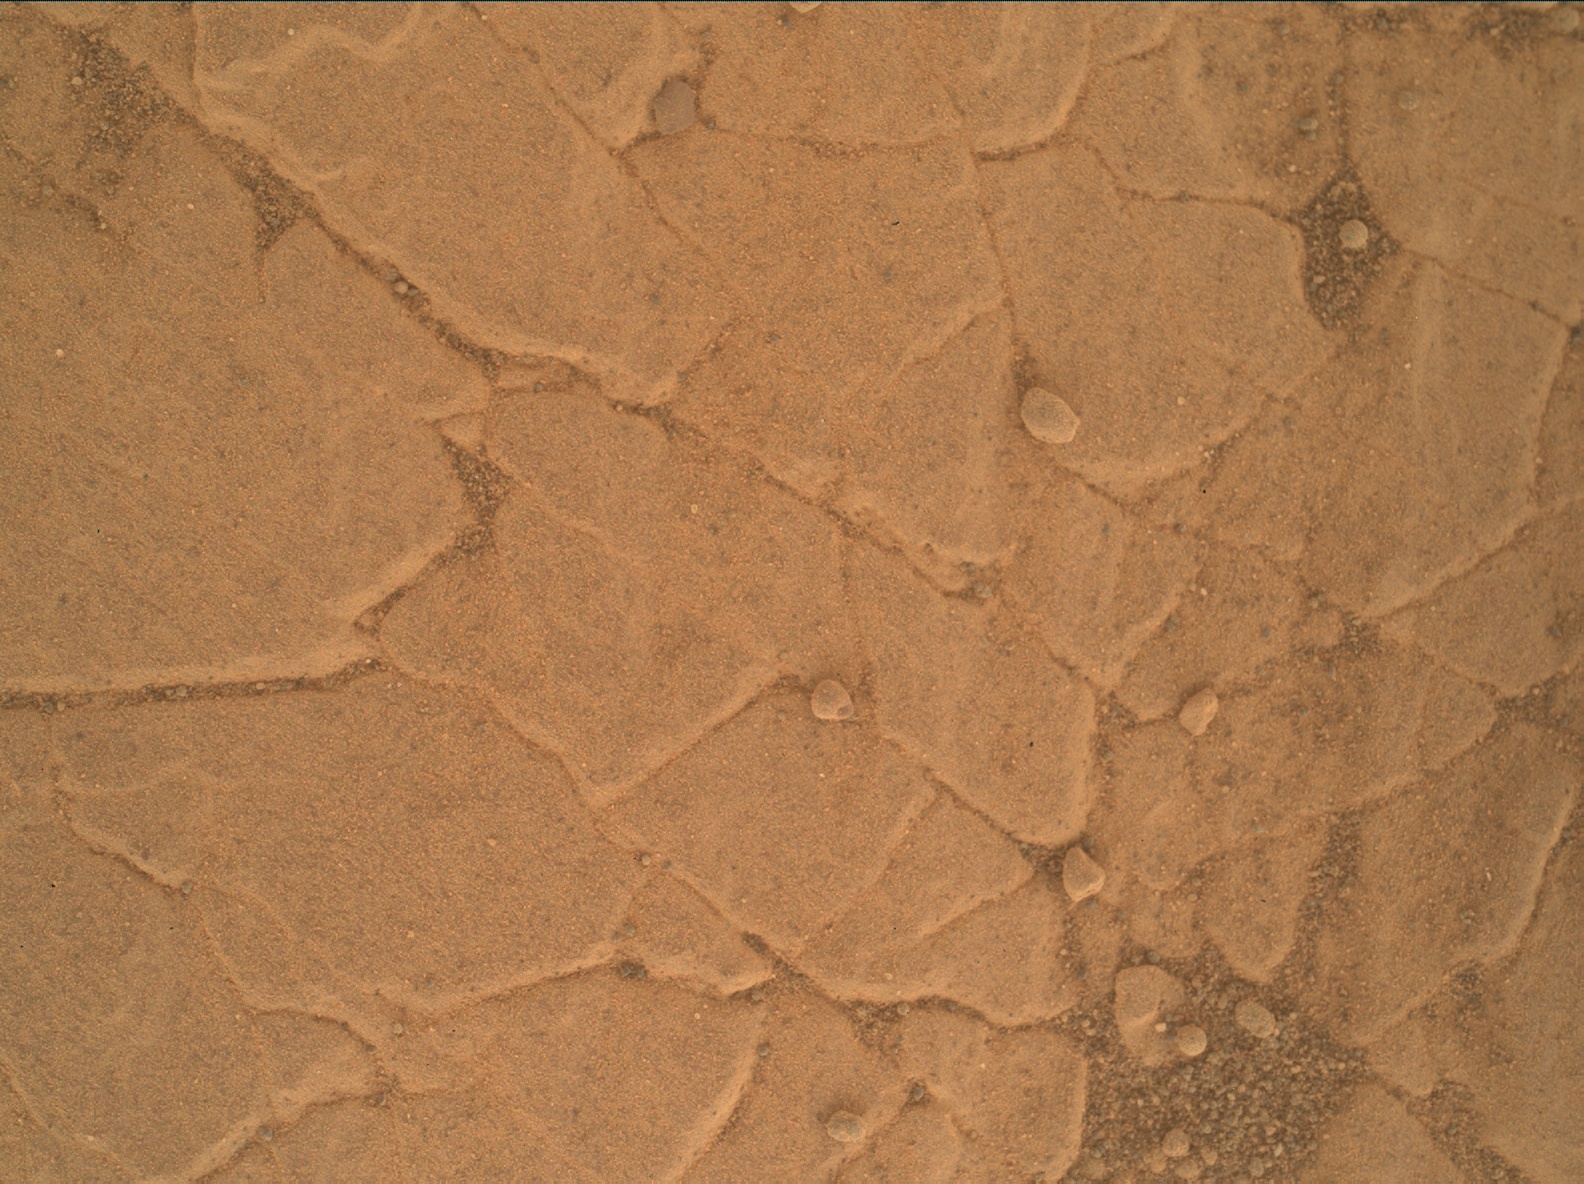 Nasa's Mars rover Curiosity acquired this image using its Mars Hand Lens Imager (MAHLI) on Sol 2359